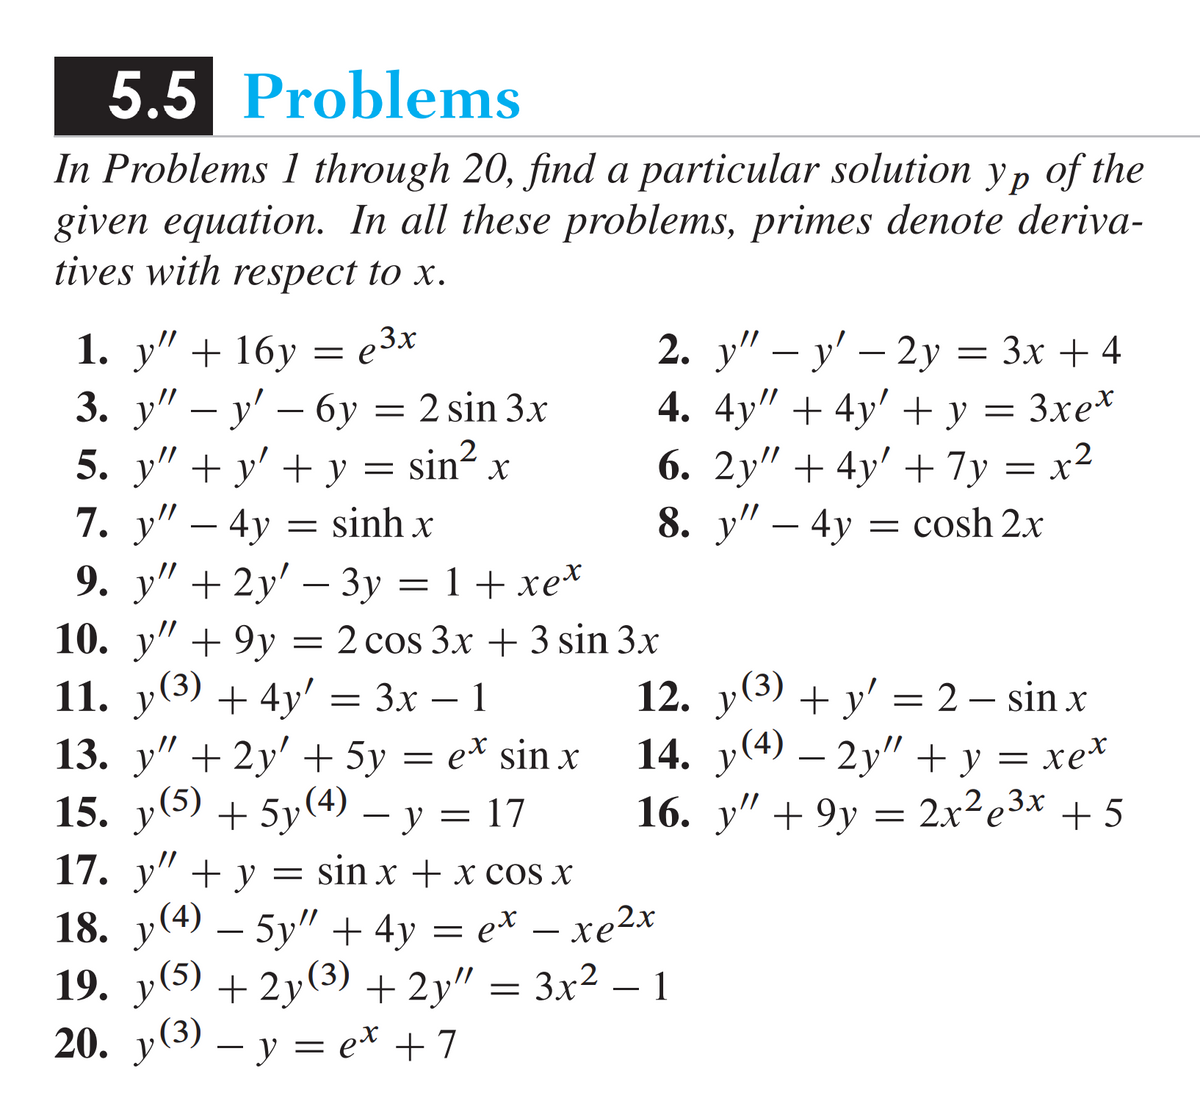 5.5 Problems
In Problems 1 through 20, find a particular solution yp of the
given equation. In all these problems, primes denote deriva-
tives with respect to x.
1. y" + 16y = e3x
3. y" — y' — 6y
y' -
5. y" + y' + y = sin² x
7. y” – 4y = sinh x x
6y= 2 sin 3x
2. y" — y' - 2y = 3x + 4
4. 4y" + 4y' + y = 3xex
6. 2y" +4y' + 7y=x²
8. y" - 4y
= cosh 2x
9. y" + 2y' - 3y = 1 + xe*
10. y" +9y = 2 cos 3x + 3 sin 3x
11. y(³) + 4y' = 3x − 1
-
-
12. y(³) + y' = 2 — sin x
14. y(4) — 2y" + y = xe*
16. y" +9y = 2x²e³x + 5
13. y" + 2y' + 5y = e* sin x
15. y(5) + 5y (4) − y = 17
17. y" + y = sin x + x cos x
18. y(4) — 5y" + 4y
= et — xe2x
19. y(5) + 2y(³) + 2y″ = 3x² − 1
20. y(³) — y = e* +7